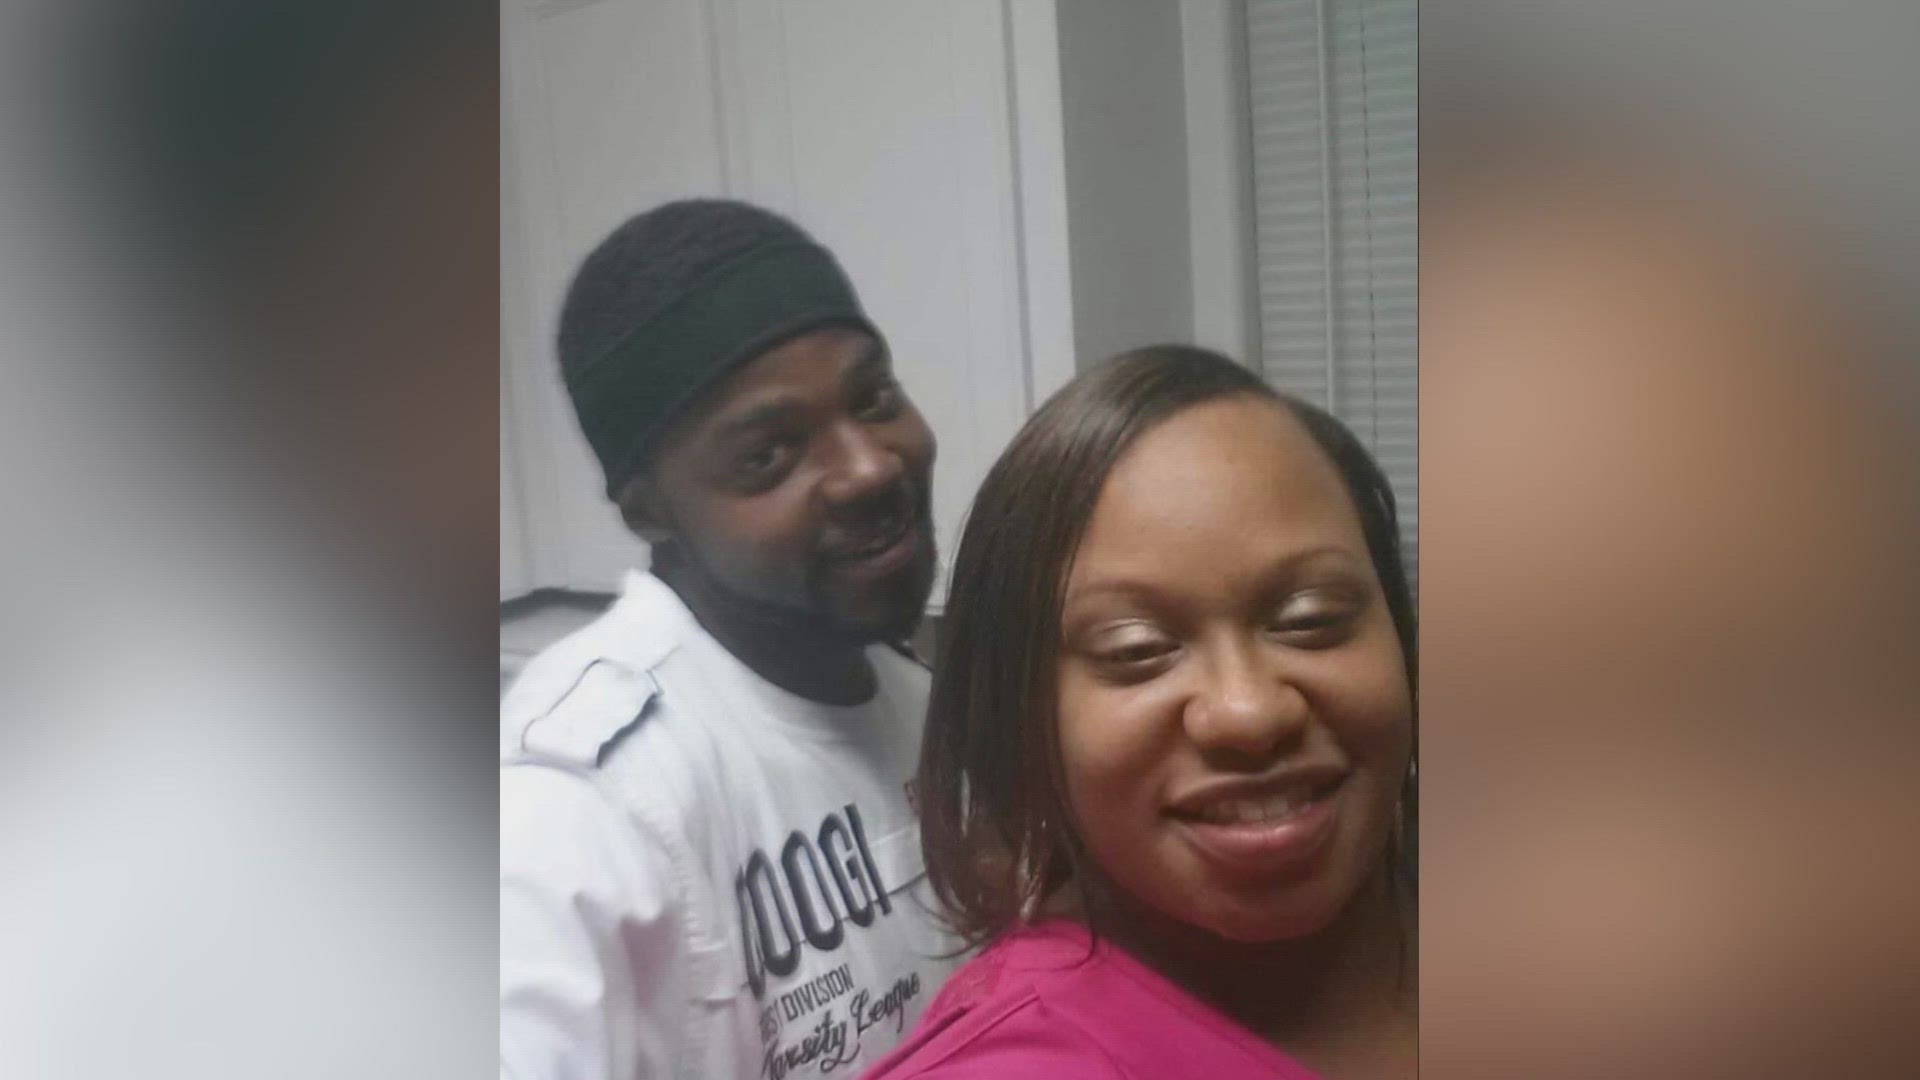 37-year-old Nicole Evette Wells was found dead in the garage of home after police say she and a man were shot. The man found with the woman was sent to the hospital.